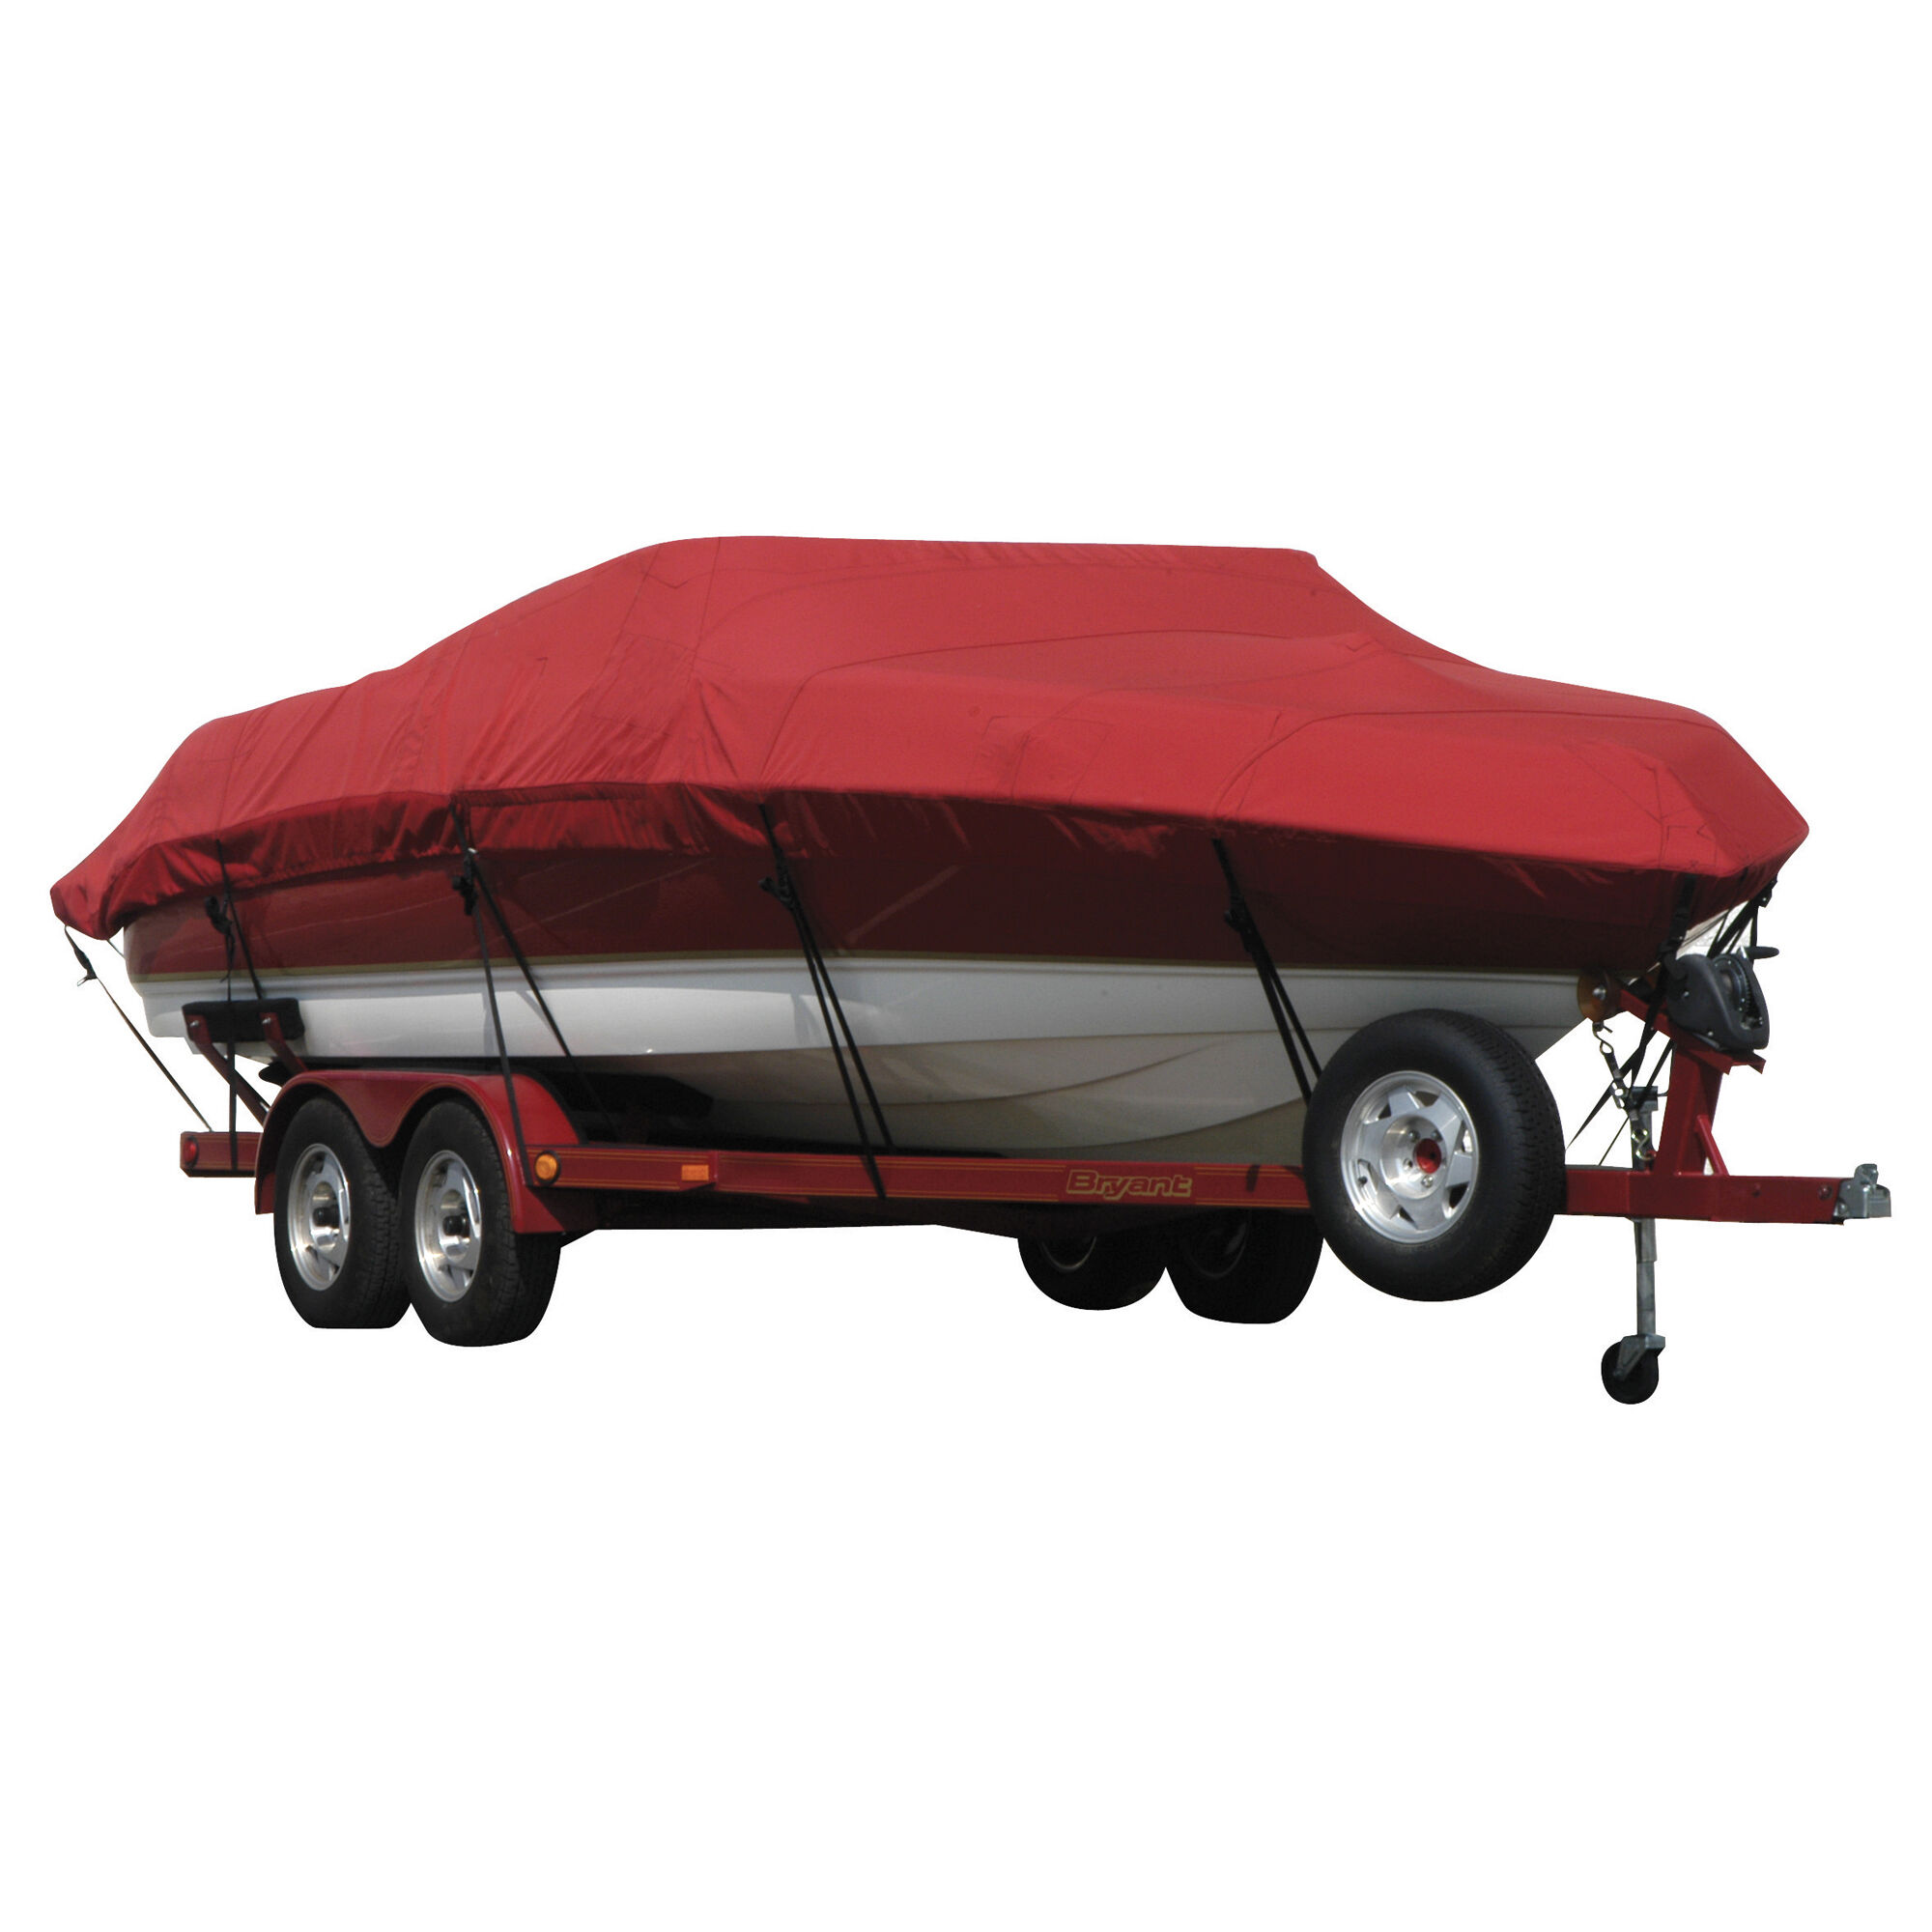 Covermate Exact Fit Sunbrella Boat Cover for Campion Chase 580 Zri/Zricd Chase 580 Zri/Zricd I/O. Red Acrylic